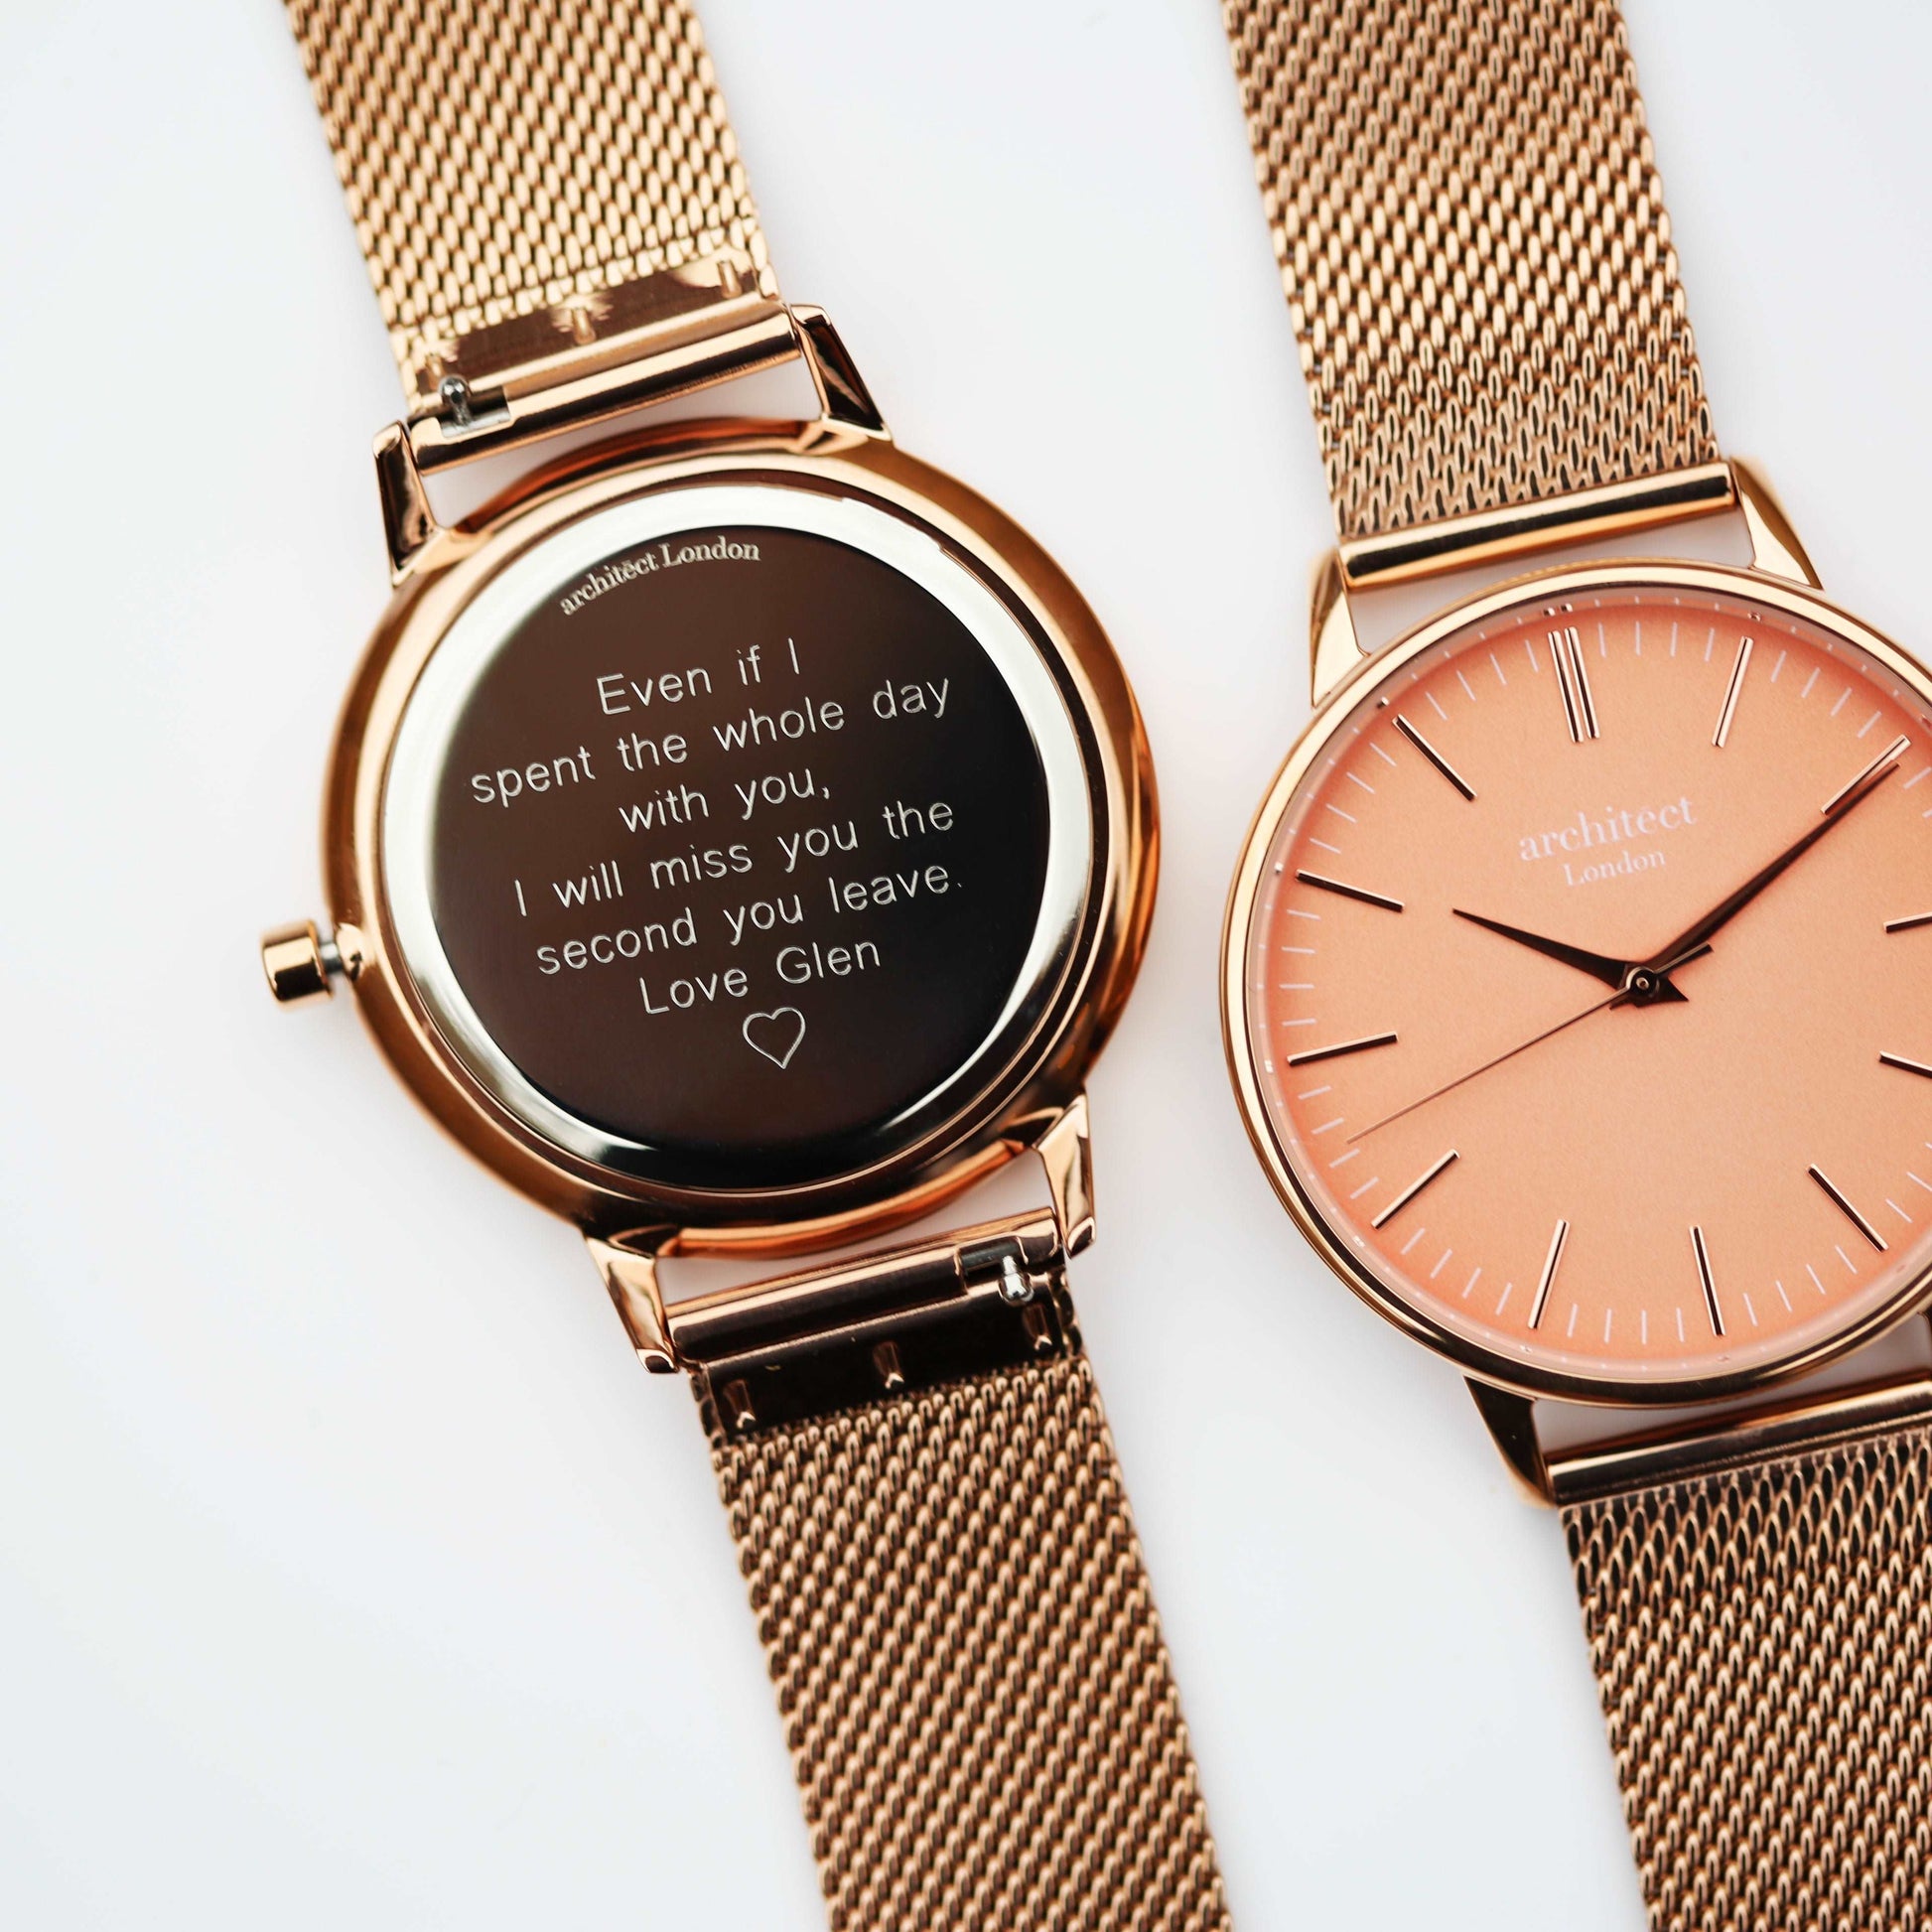 Personalized Ladies' Watches - Architēct Coral Engraved Watch In Rose Gold 